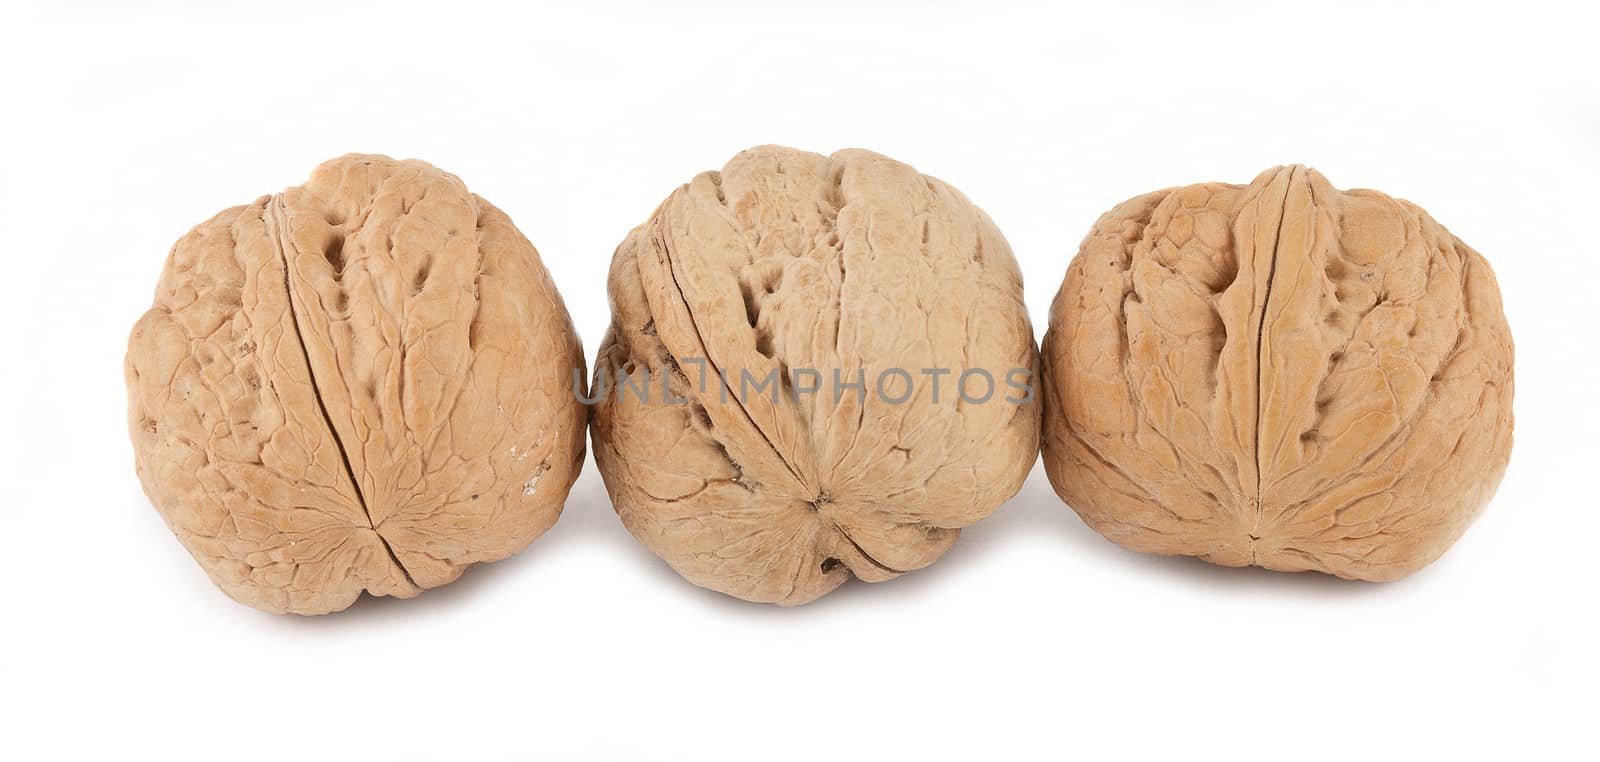 Circassian walnuts, isolated on white background